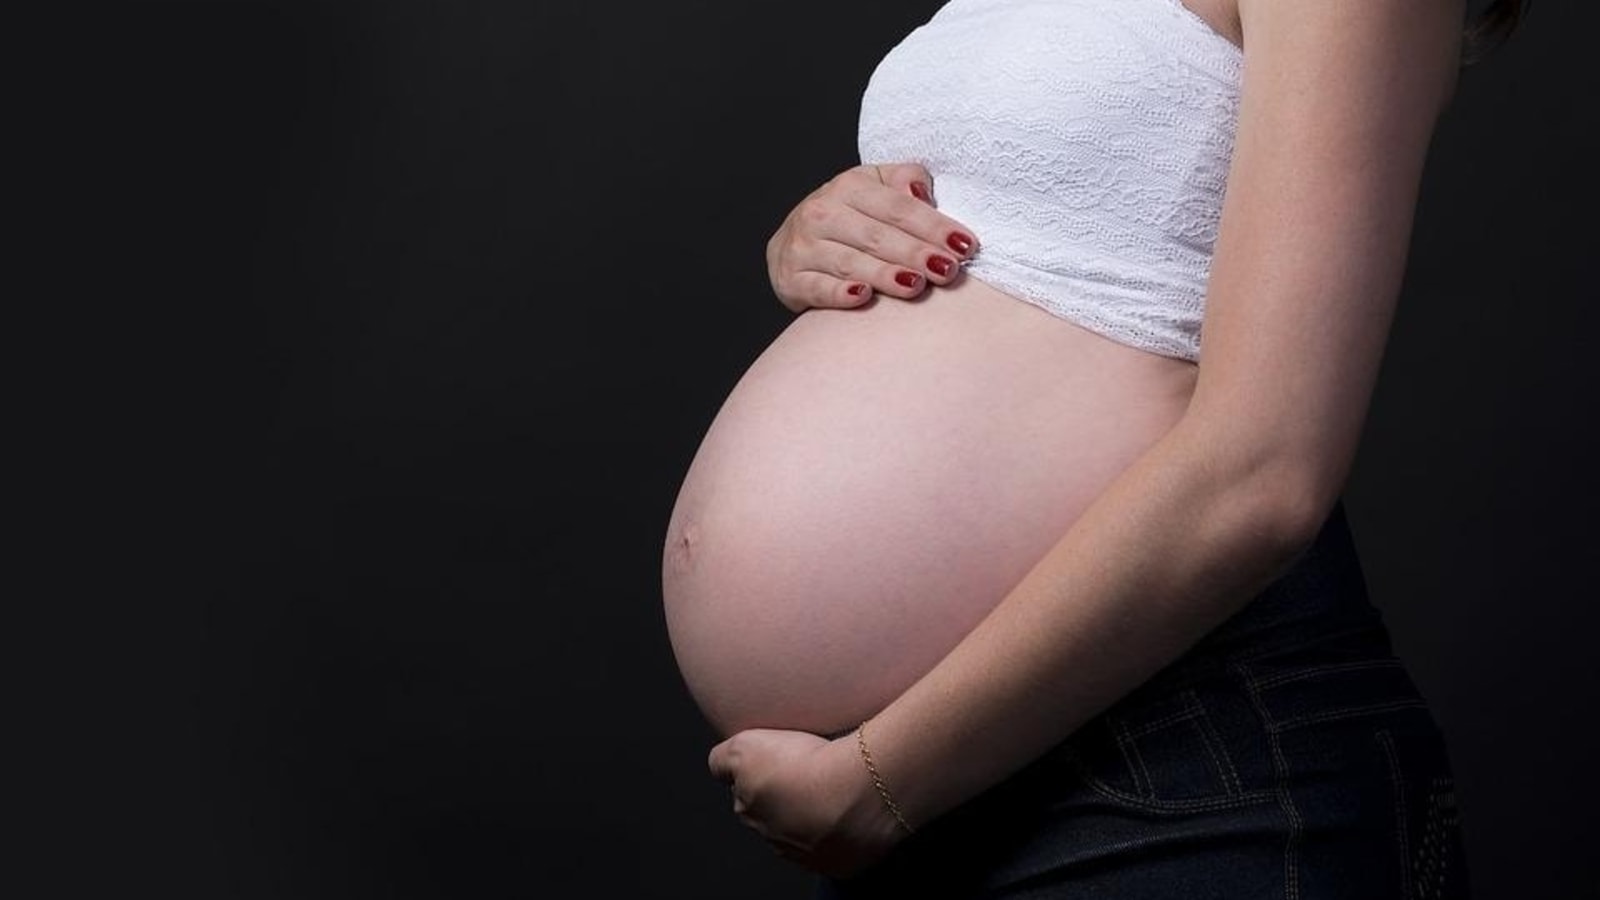 autistic-people-more-vulnerable-to-depression-anxiety-during-pregnancy-study